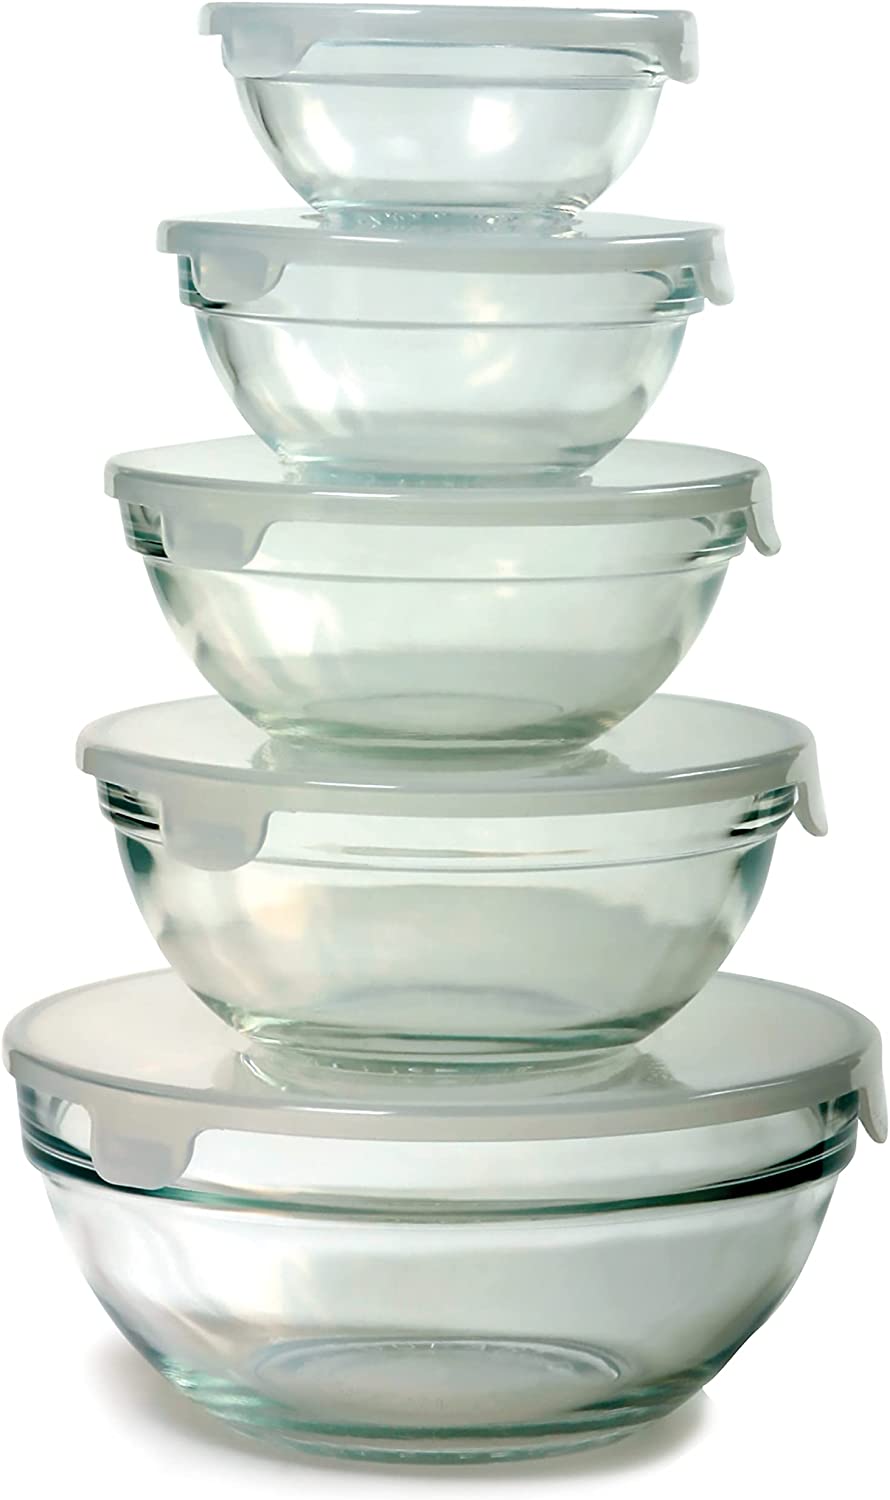 4 pyrex glass mixing bowls with lids 